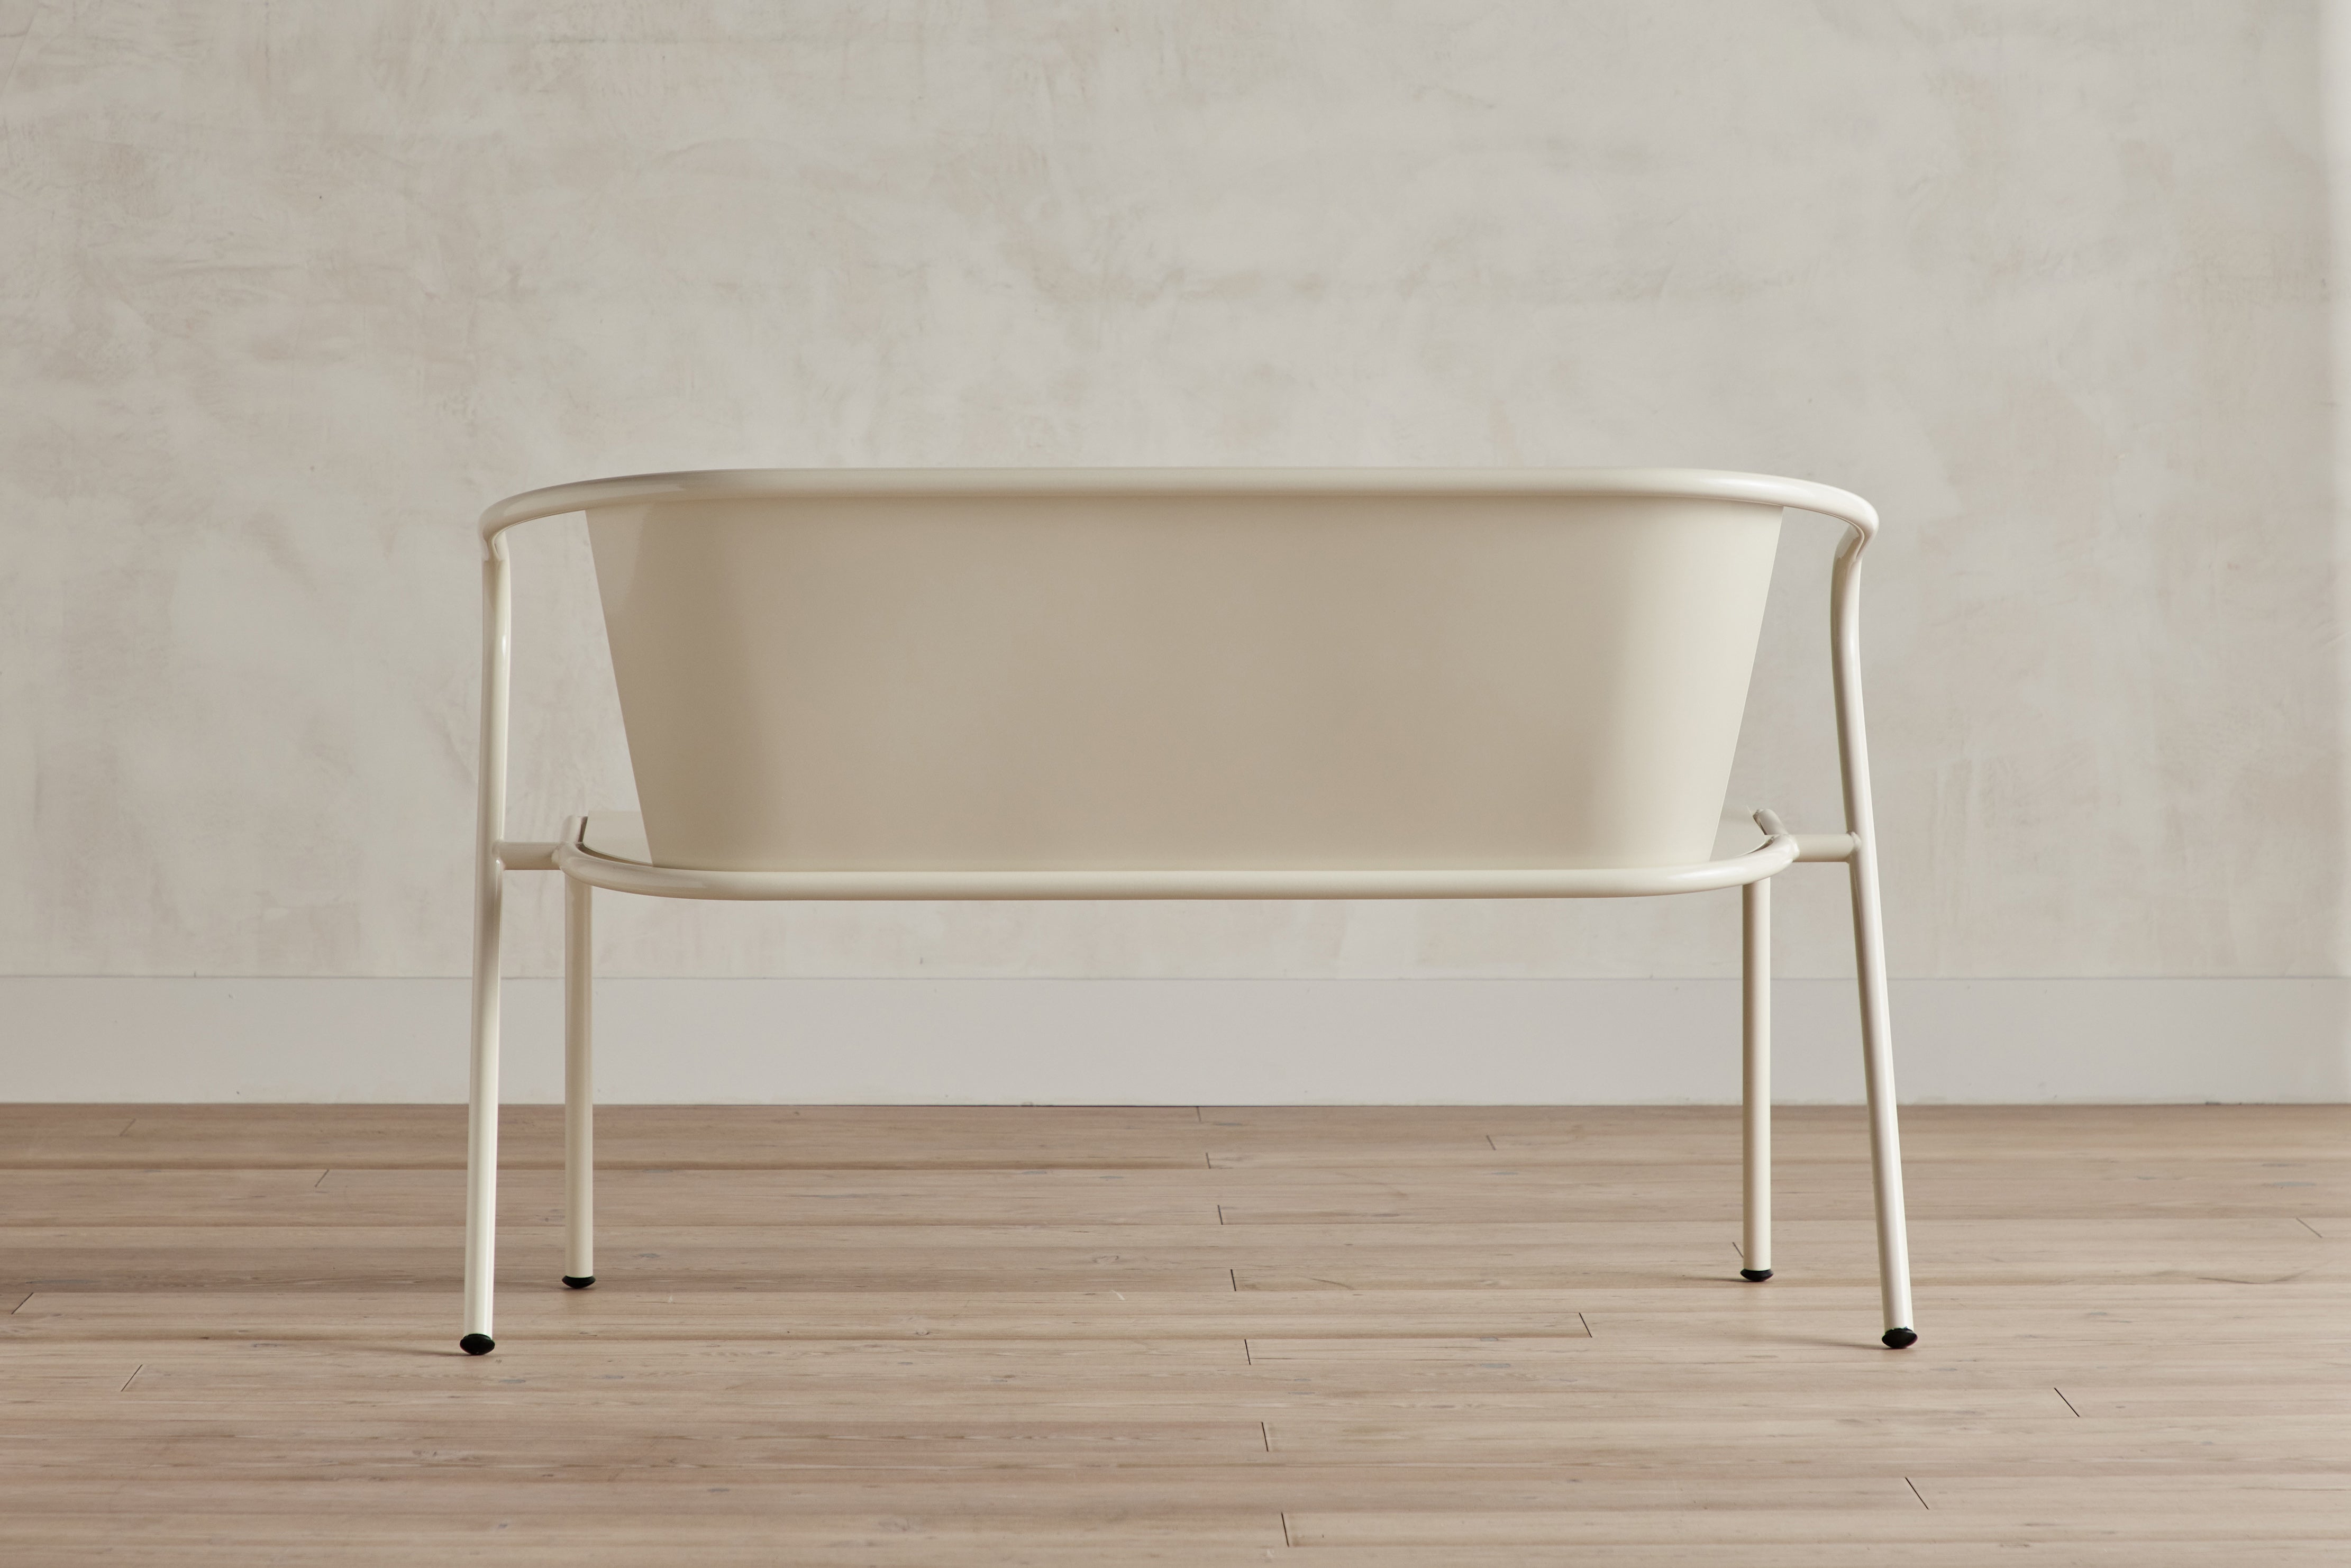 Nickey Kehoe Cafe Bench - In Stock